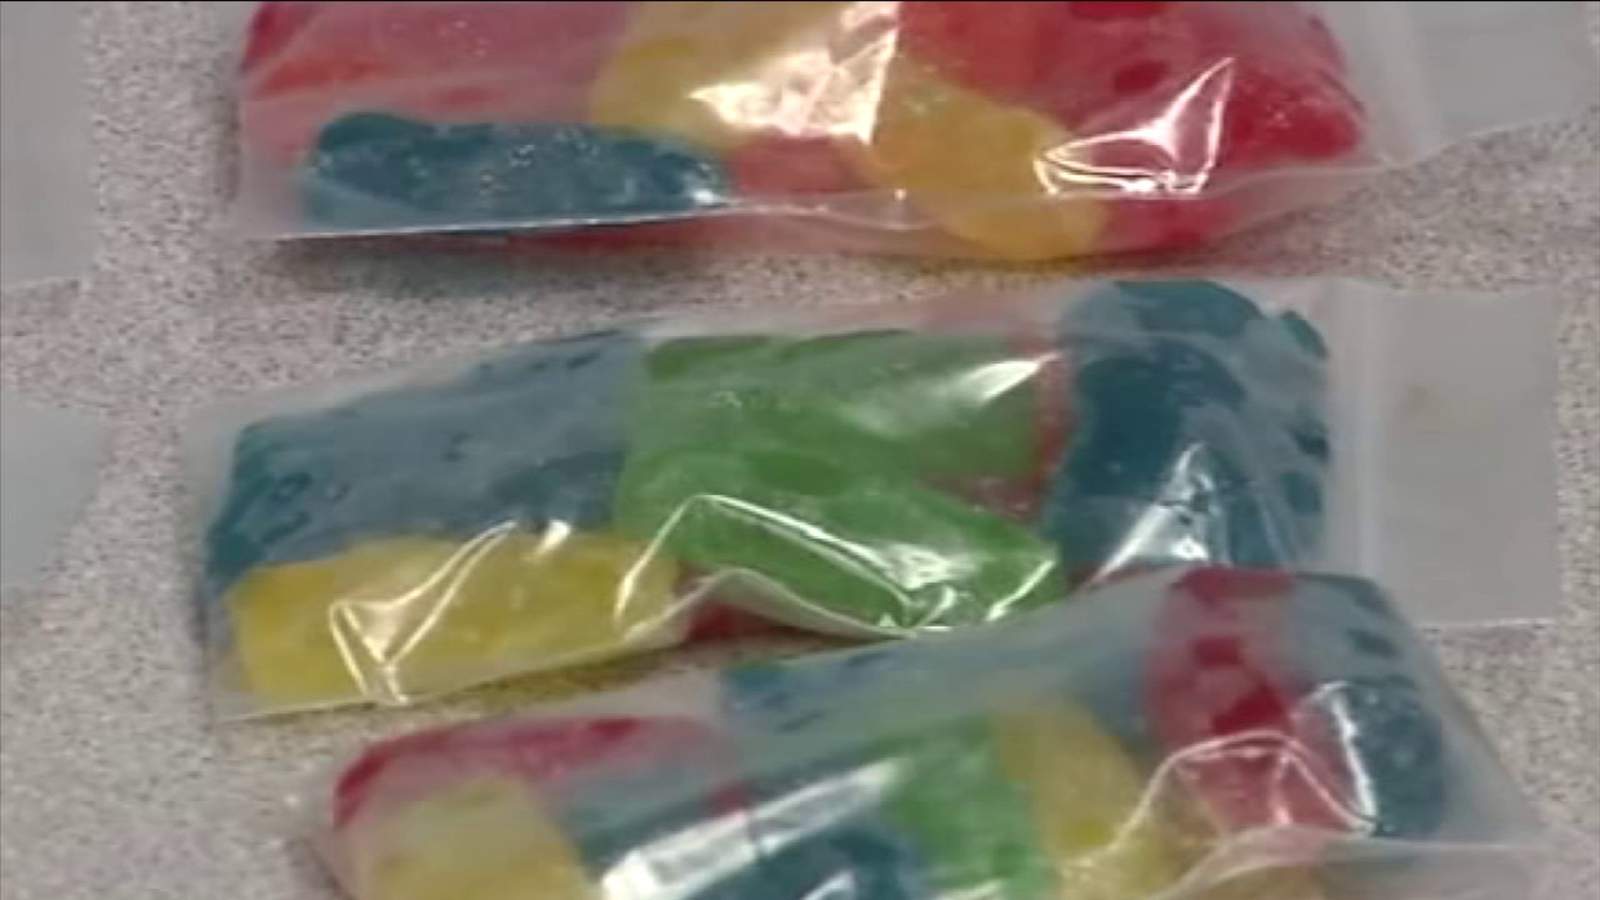 Mother says daughter was given drug-laced candy & ended up in hospital